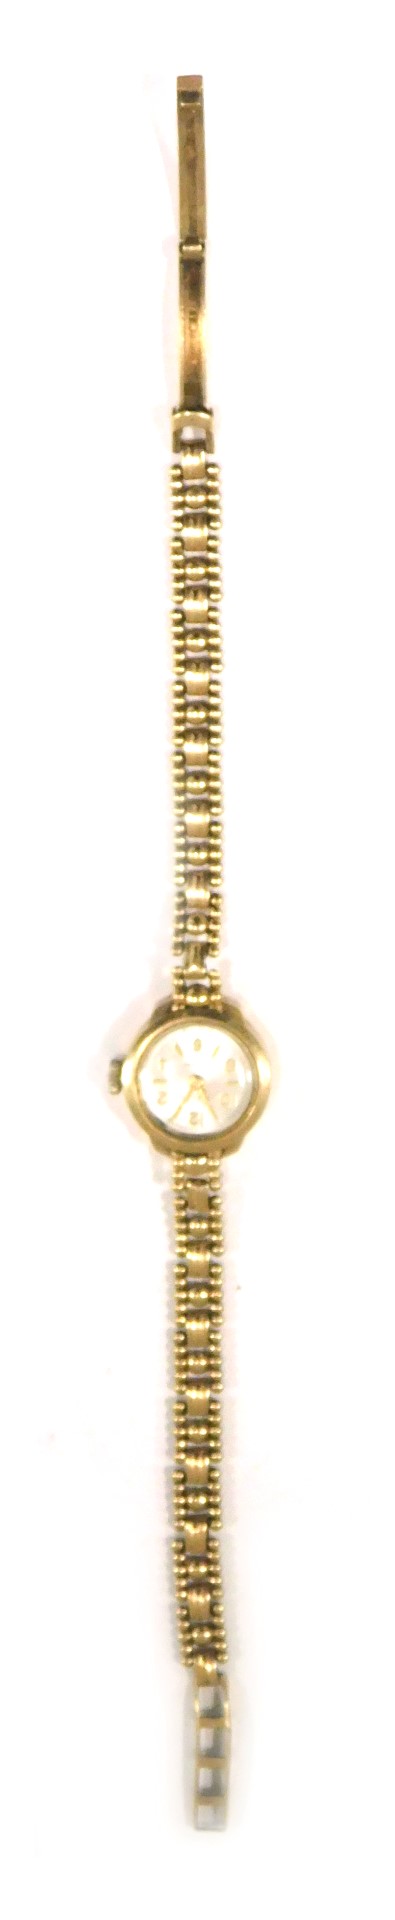 An Avia 9ct gold ladies wristwatch, the small silvered dial 1.5cm diameter, on a fancy link bracelet - Image 2 of 3